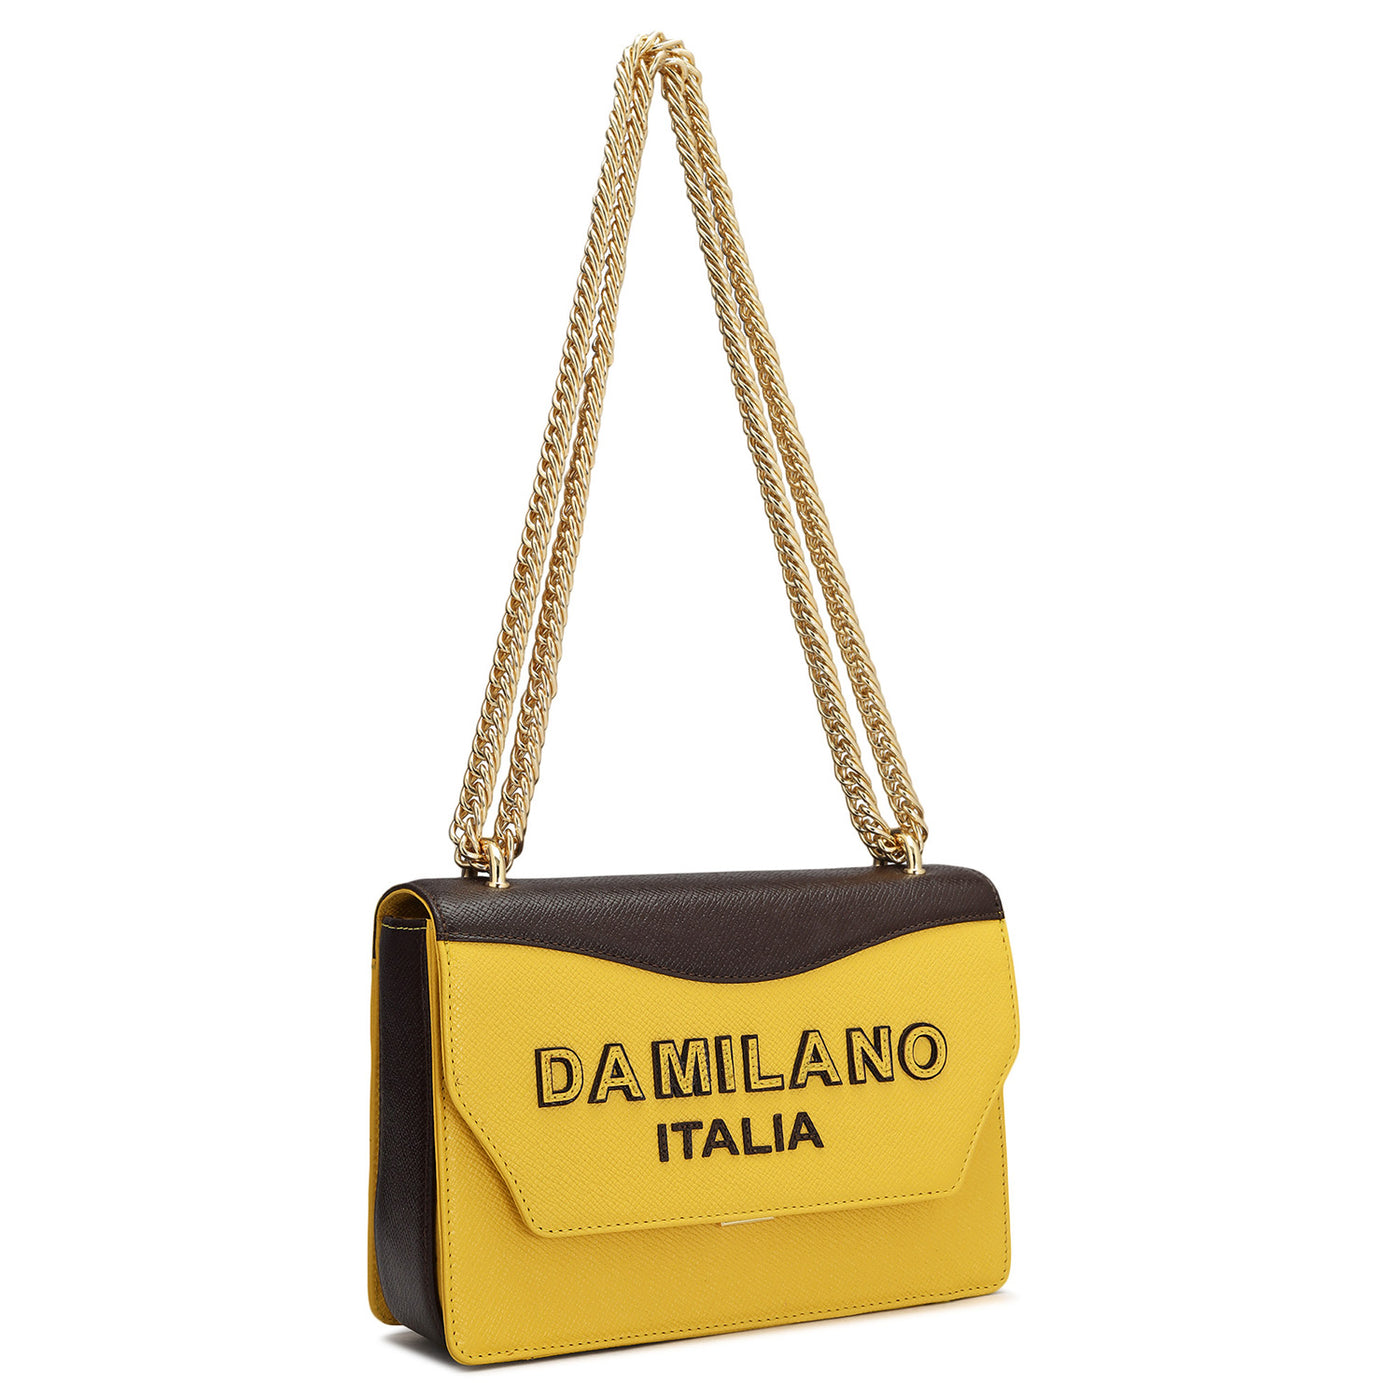 Small Franzy Leather Shoulder Bag - Minion & Chocolate